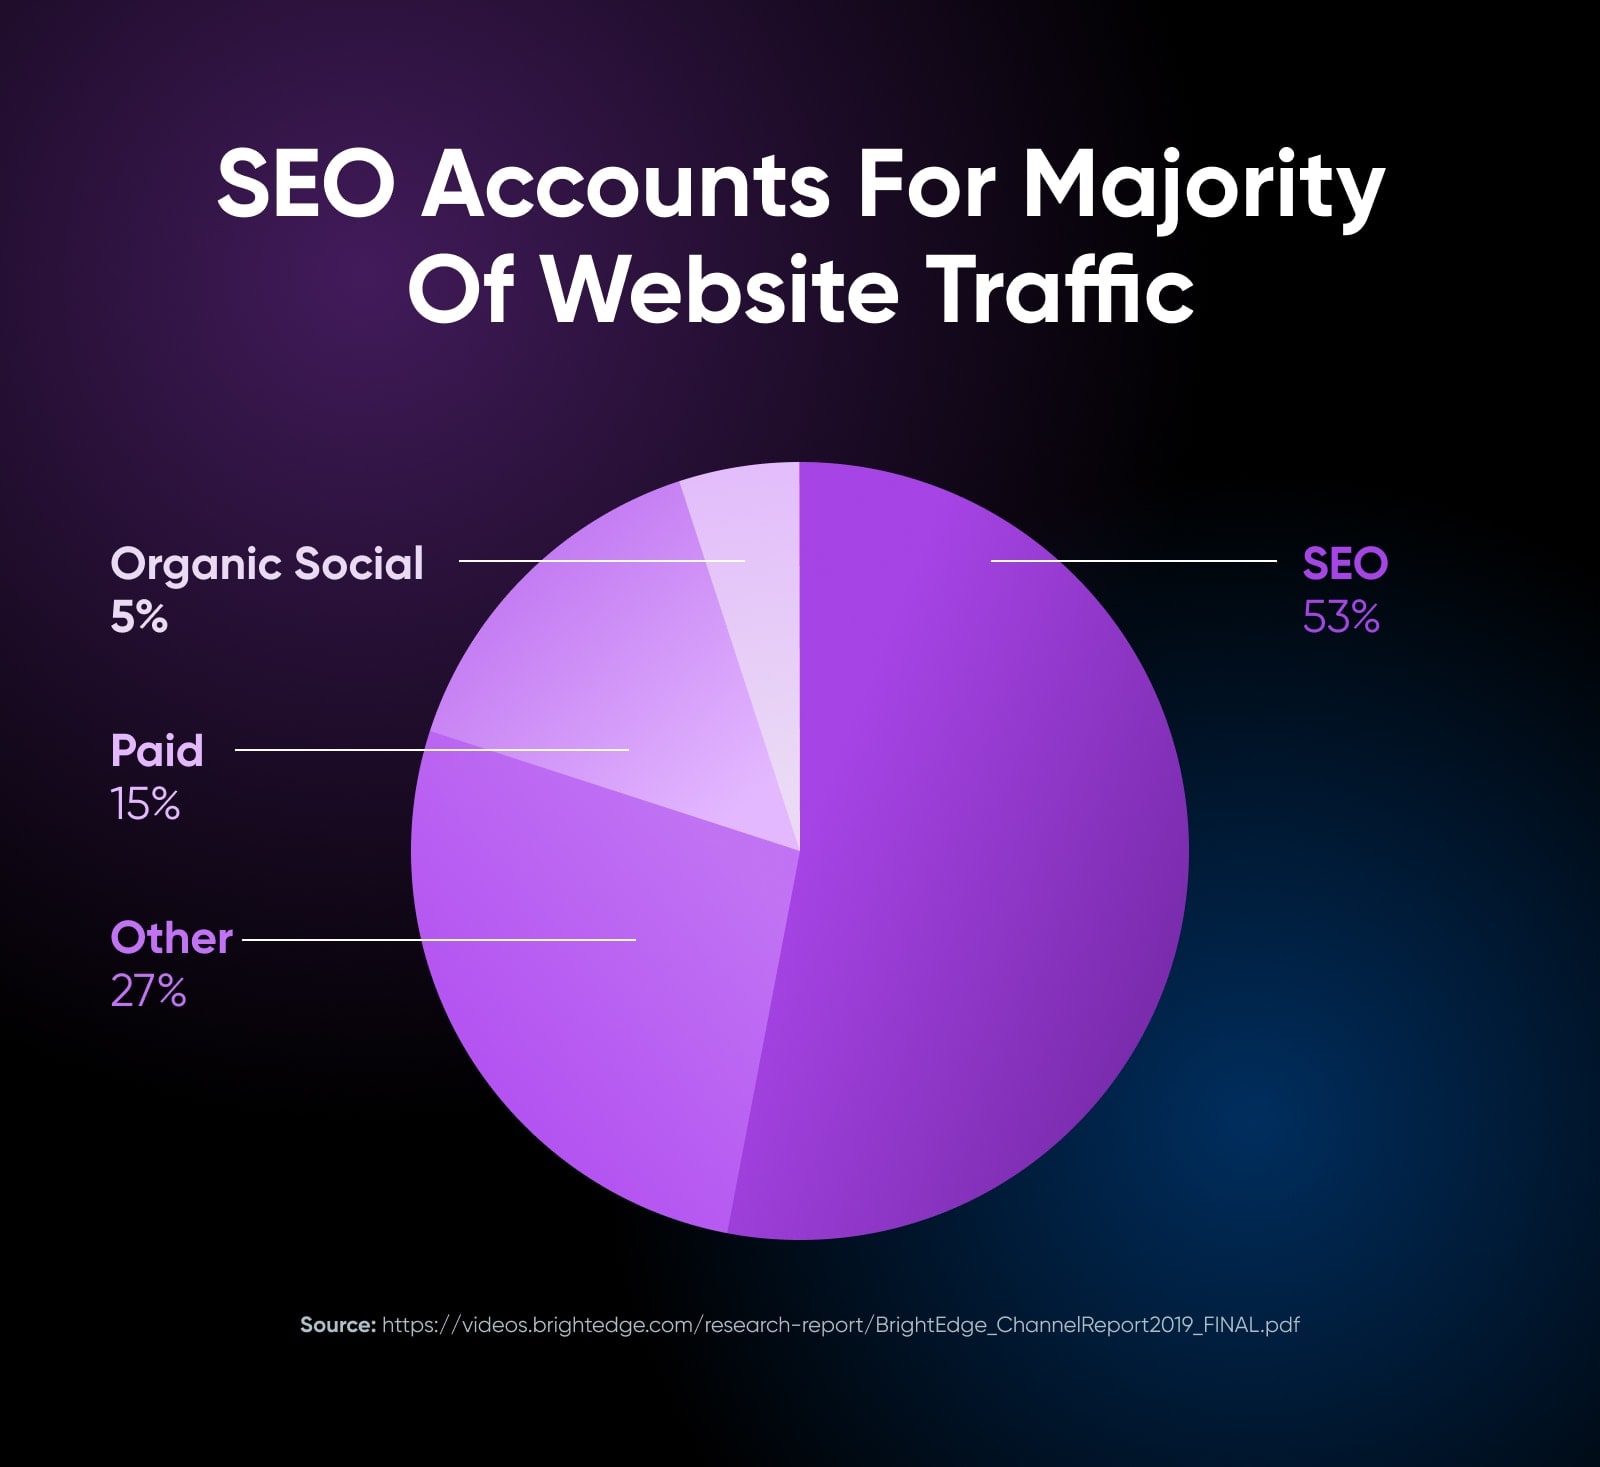 SEO accounts for majoirty of website traffic with a pie graph showing 53% where other shows 27%